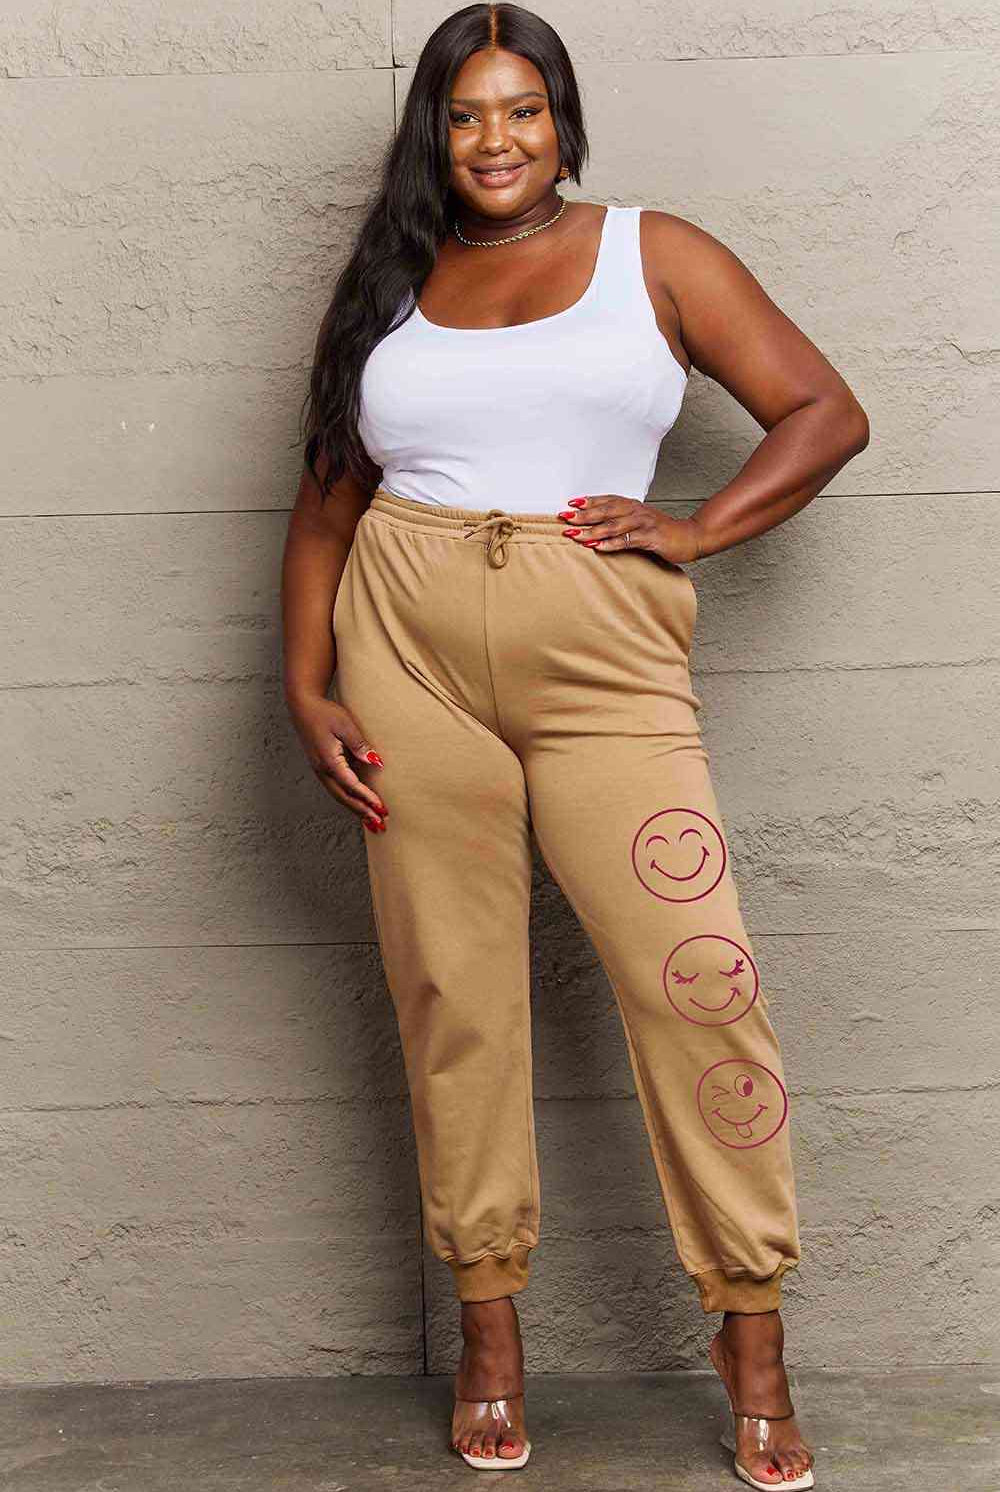 Simply Love Full Size Emoji Graphic Sweatpants - GemThreads Boutique